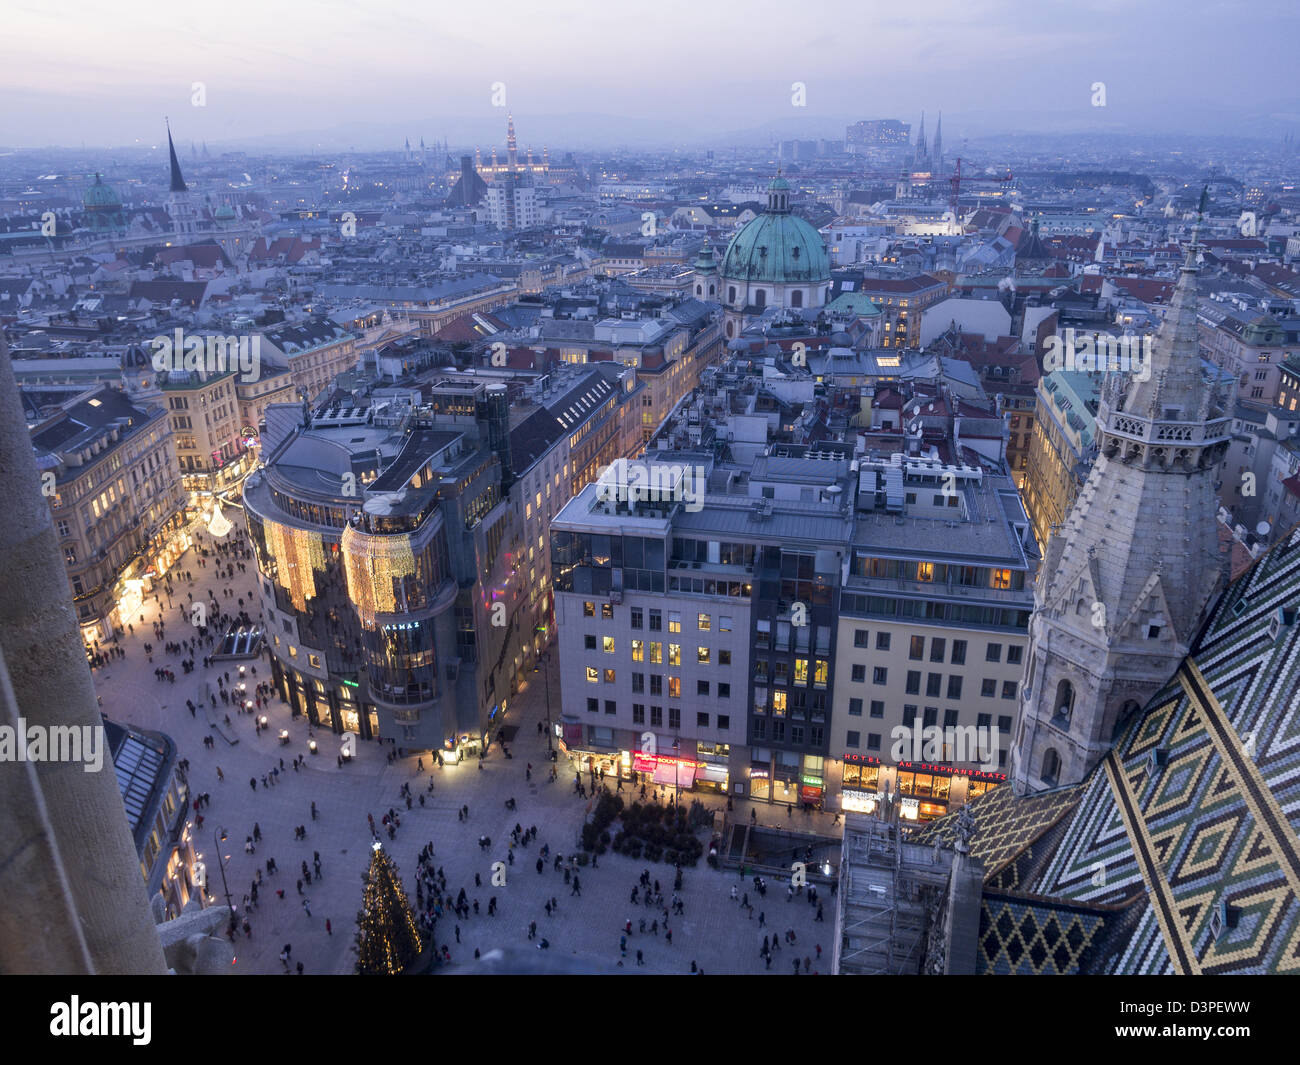 Vienna Cityscape: Stephansplatz and beyond. The view from the top of the Stephansdom steeple. Including Rathaus and the palace. Stock Photo